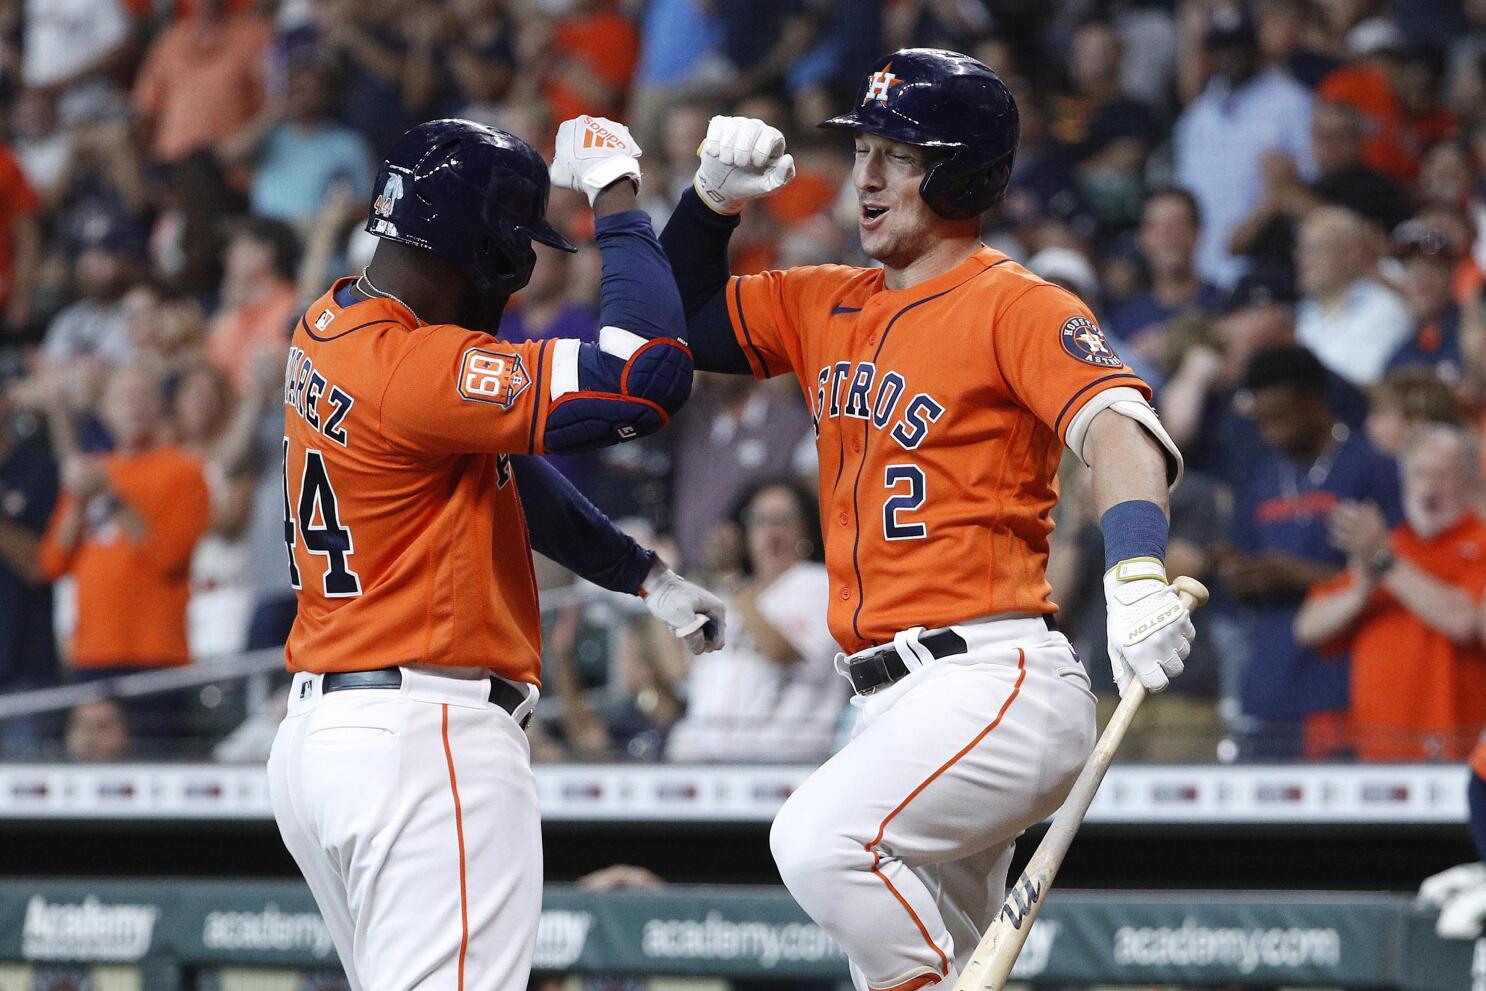 Dubon's 9th-inning single lifts Astros over Orioles 2-1 to stay